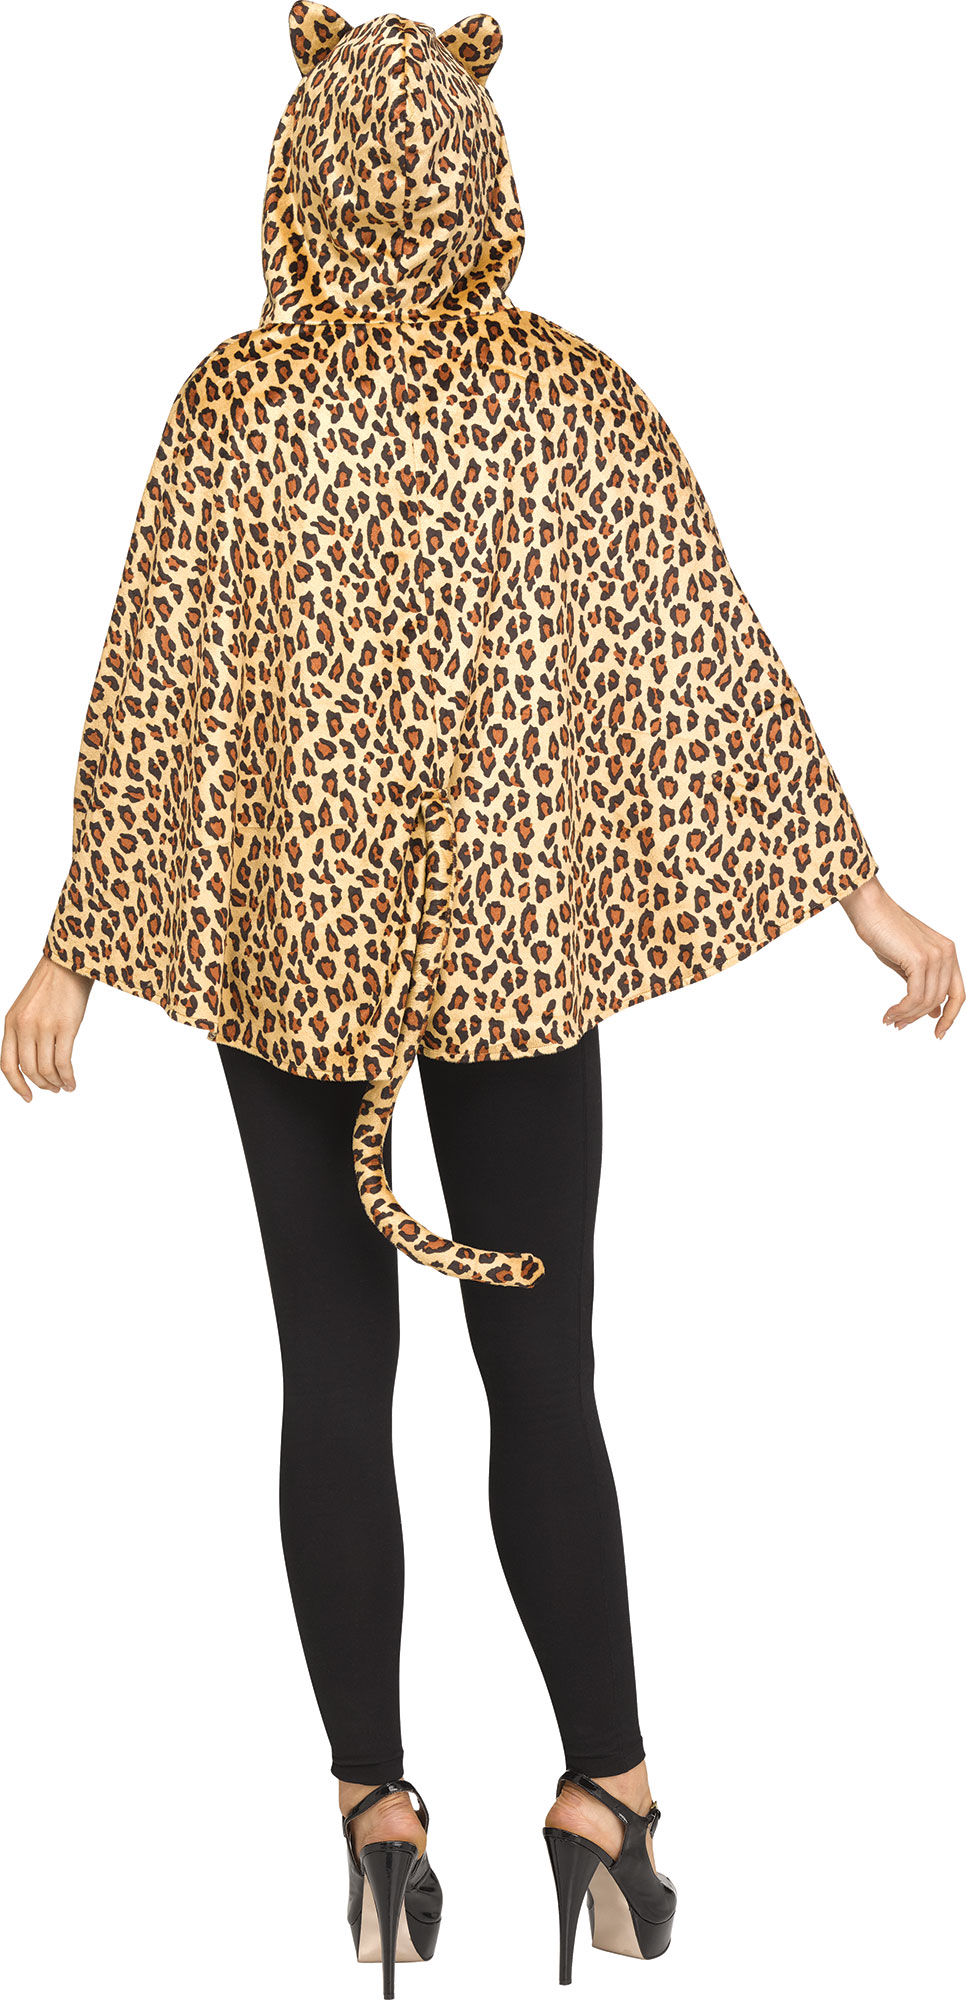 Leopard Hooded Poncho - Adult